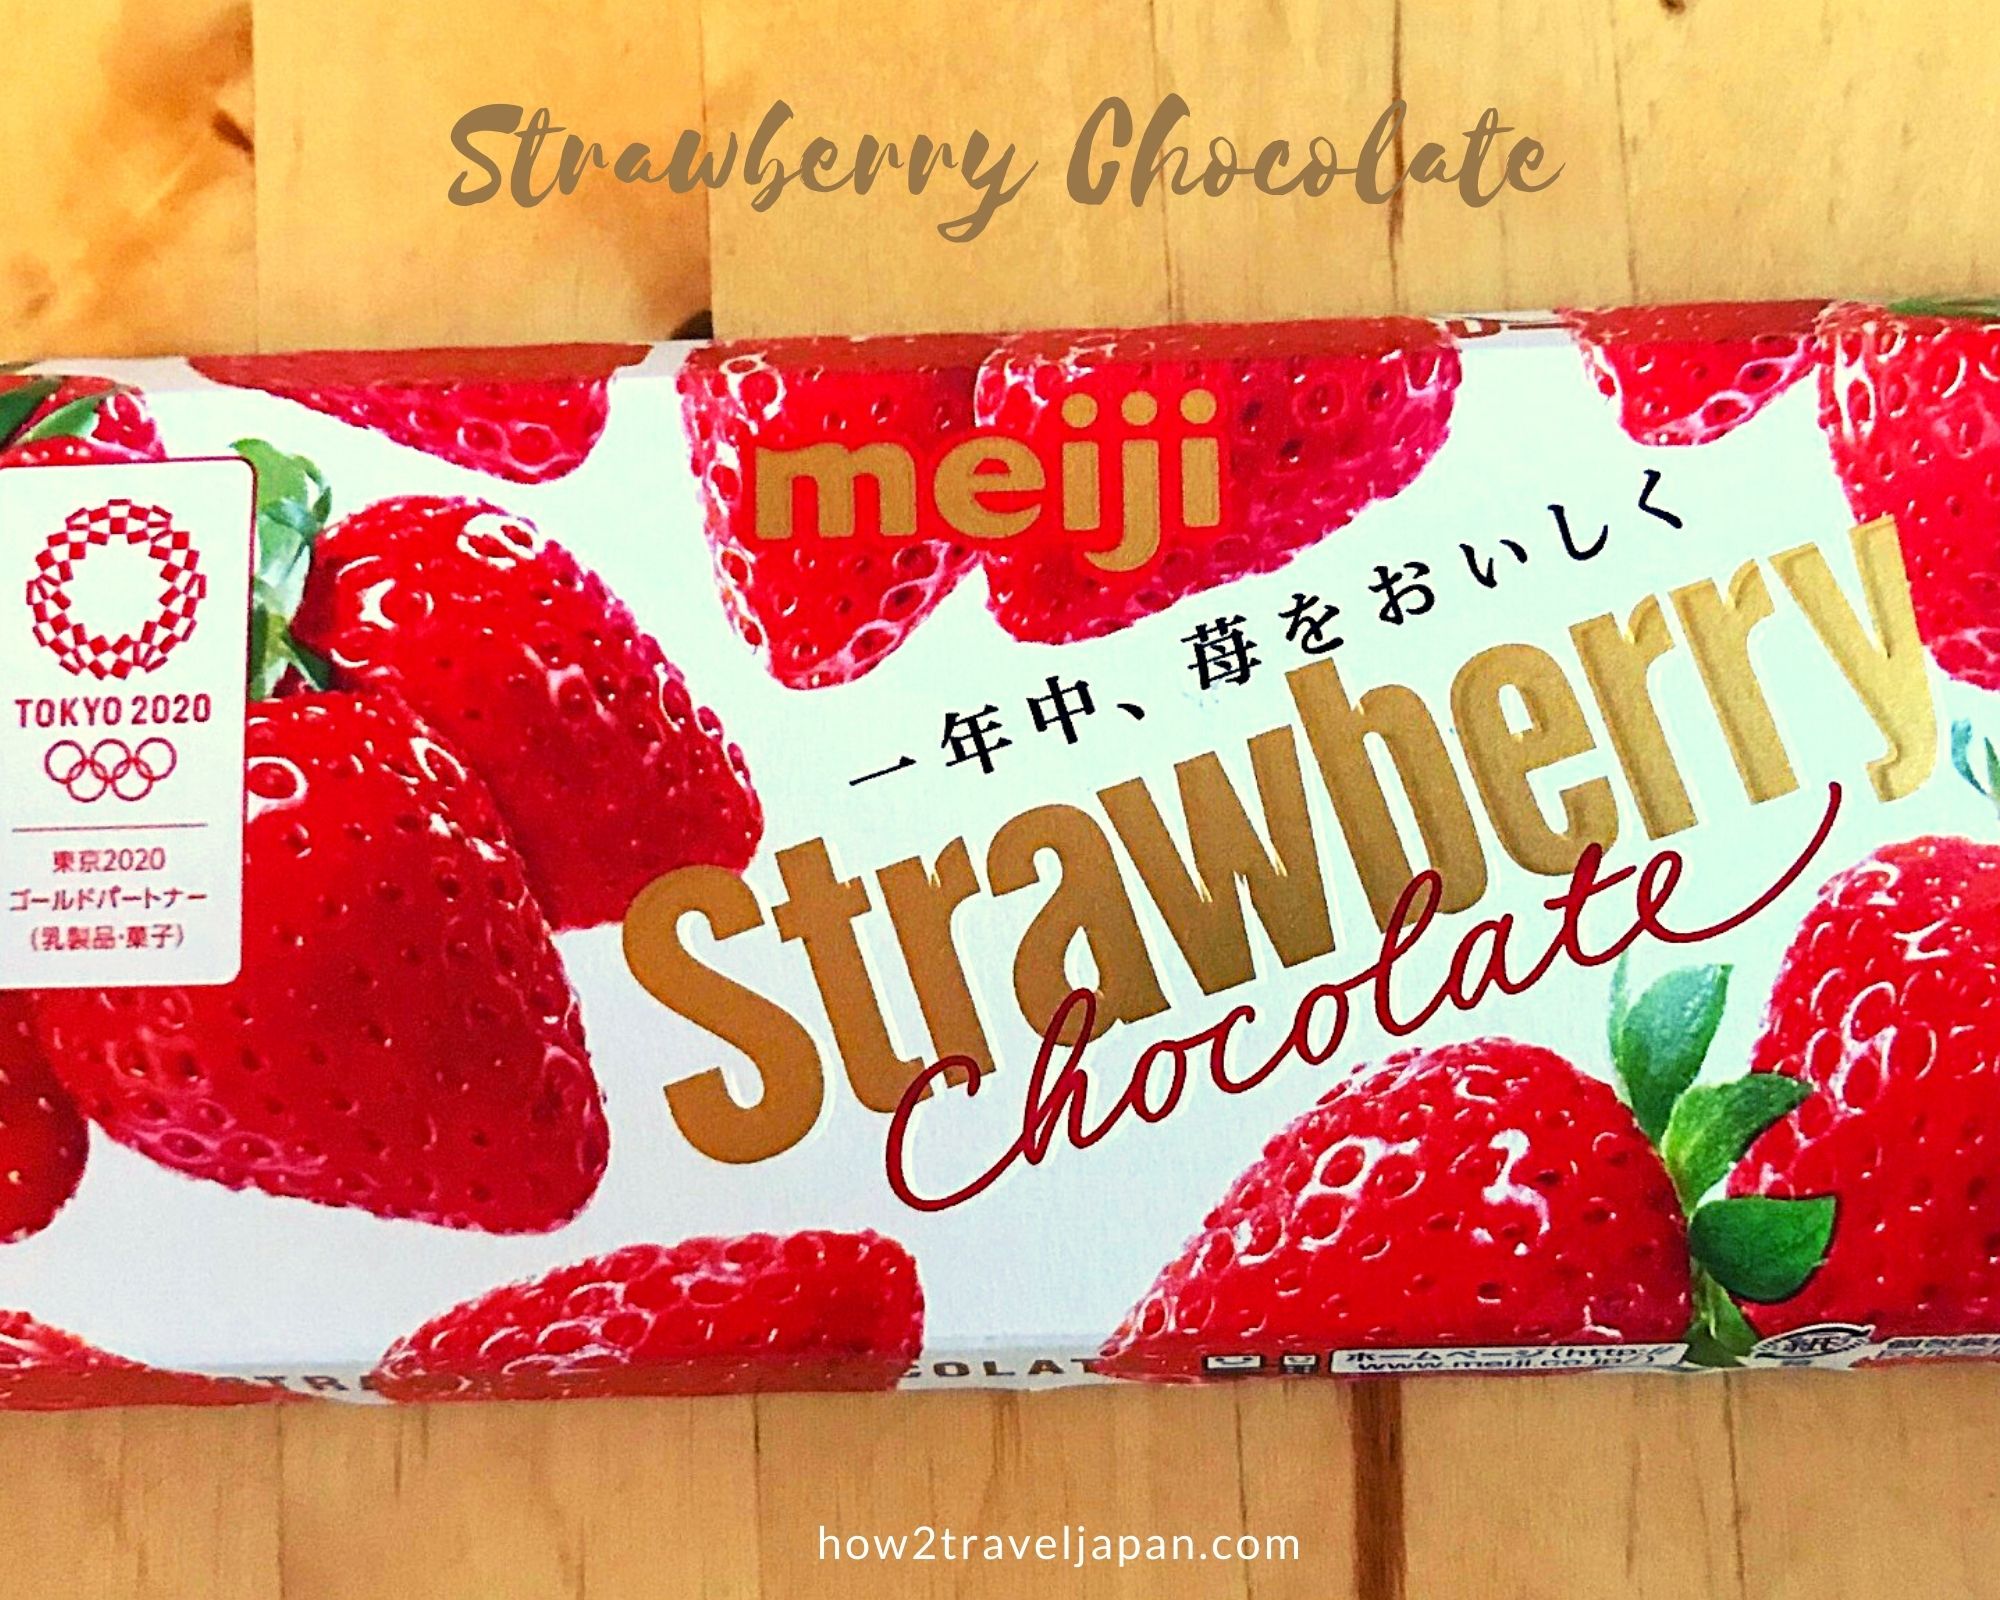 You are currently viewing Strawberry chocolate from Meiji